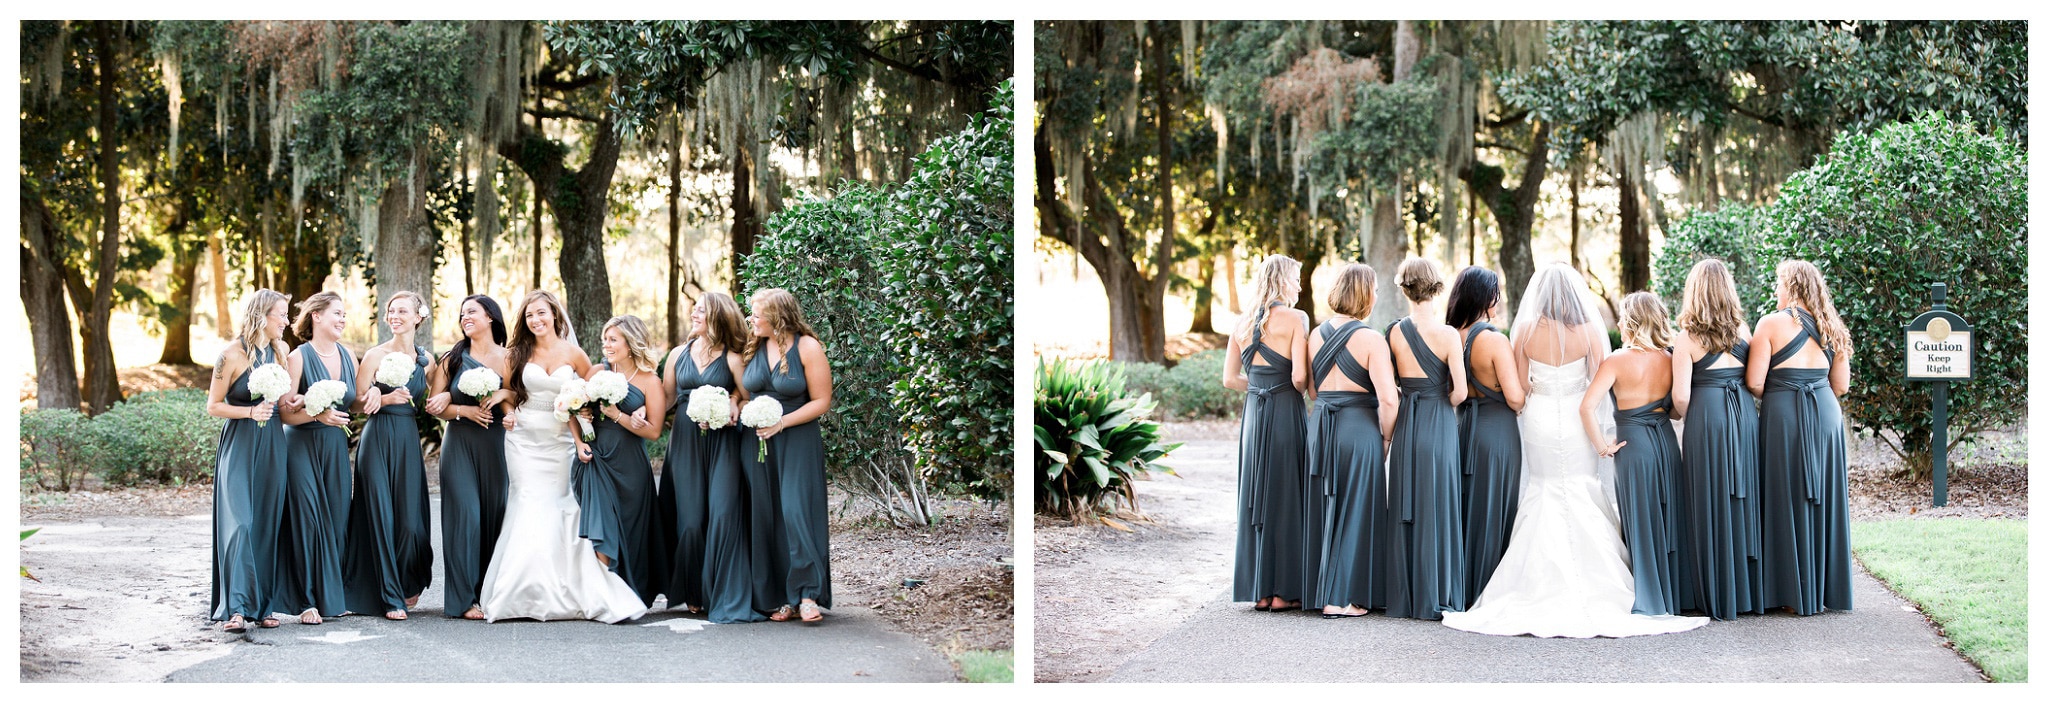 The bridal party front and back on the walkway under the live oak centerpiece, Kay and Josh's wedding at the Heritage Plantation, Pawleys Island, South Carolina on September 19, 2015 Heritage Plantation Southern wedding, Pawleys Island, South Carolina Venue and Catering: Heritage Club, Pawleys Island Music: Paul Matthews Entertainment Brides dress: The Little White Dress Cake: Buttercream Cakes and Catering Event Rentals: Eventworks Photographer: One Life Photography